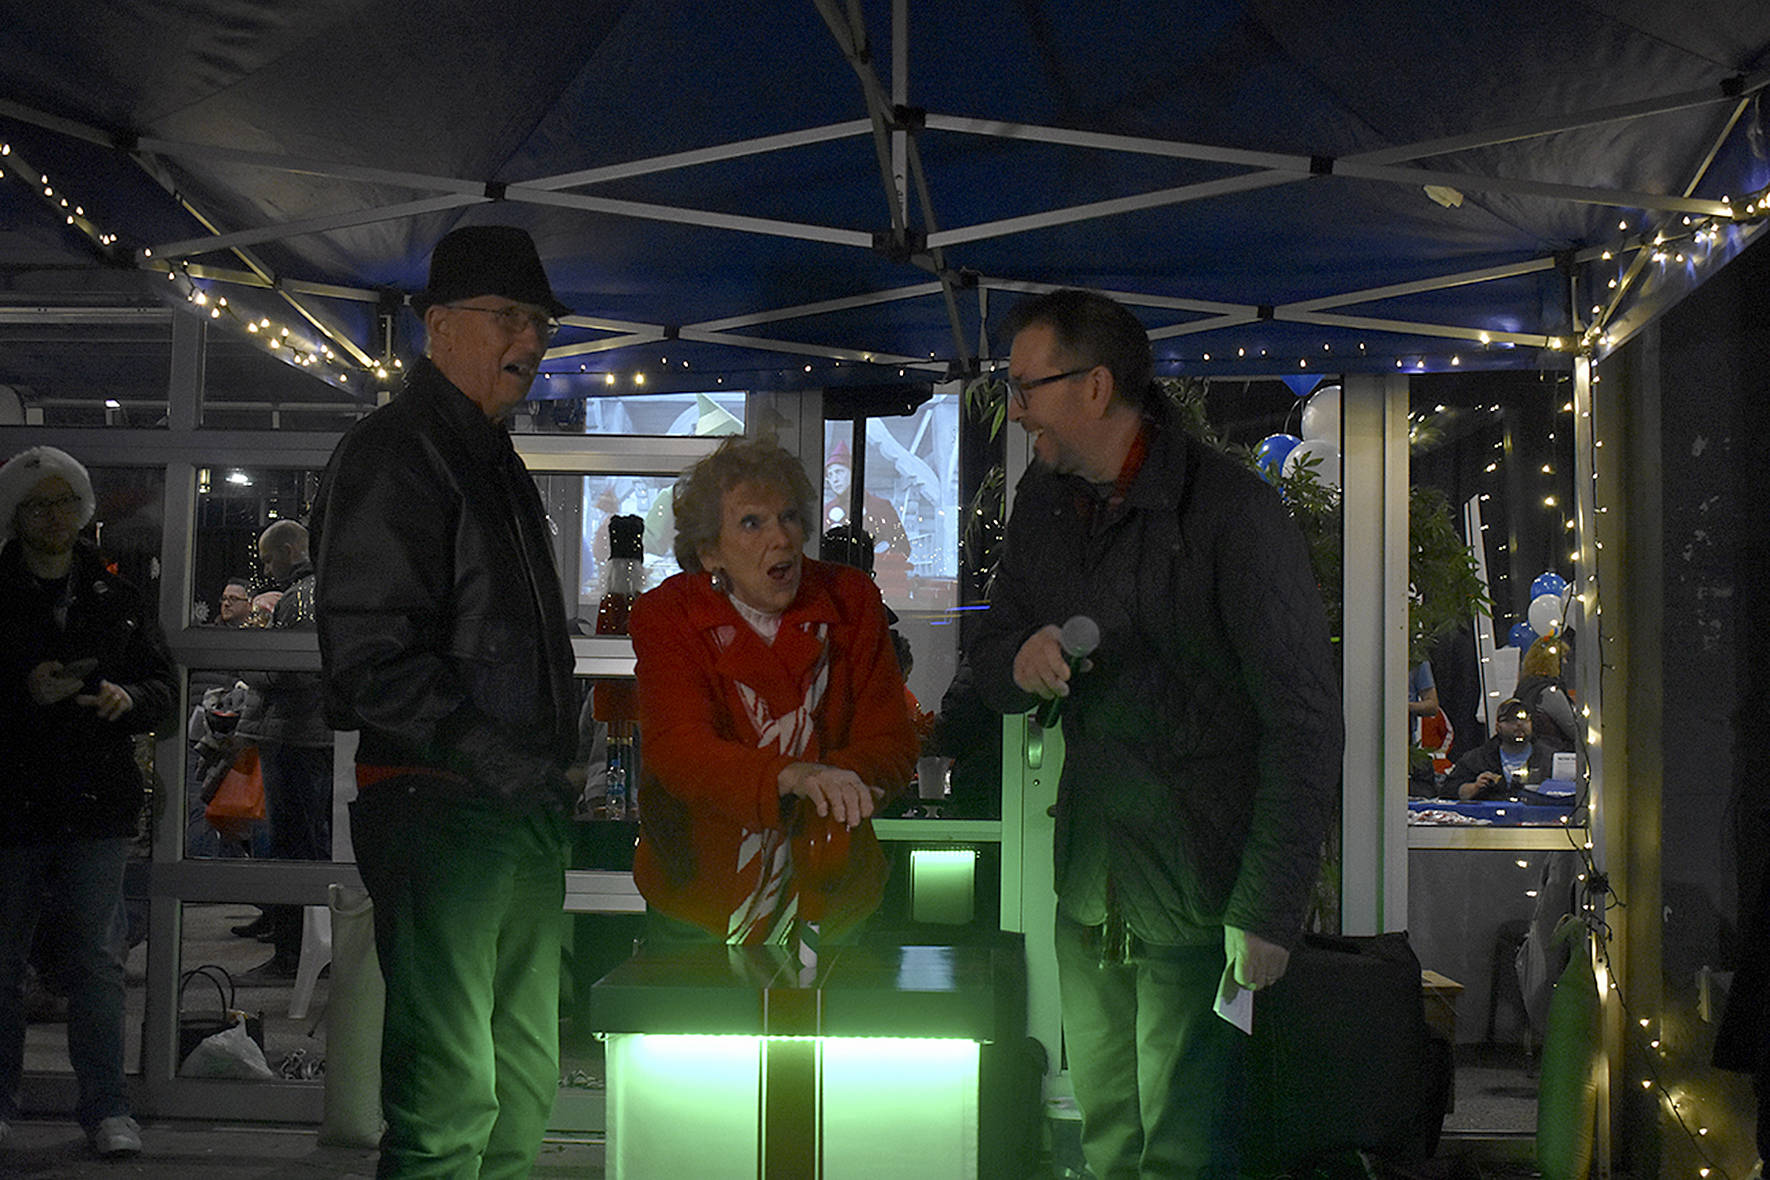 Photo by Haley Ausbun. Left to right: Bill Moss, Fay Moss, Renton residents and longtime contributors to the community, and Mayor-elect Armondo Pavone, pulled the switch to light to the downtown tree, Saturday, Nov. 30 at Piazza Park.